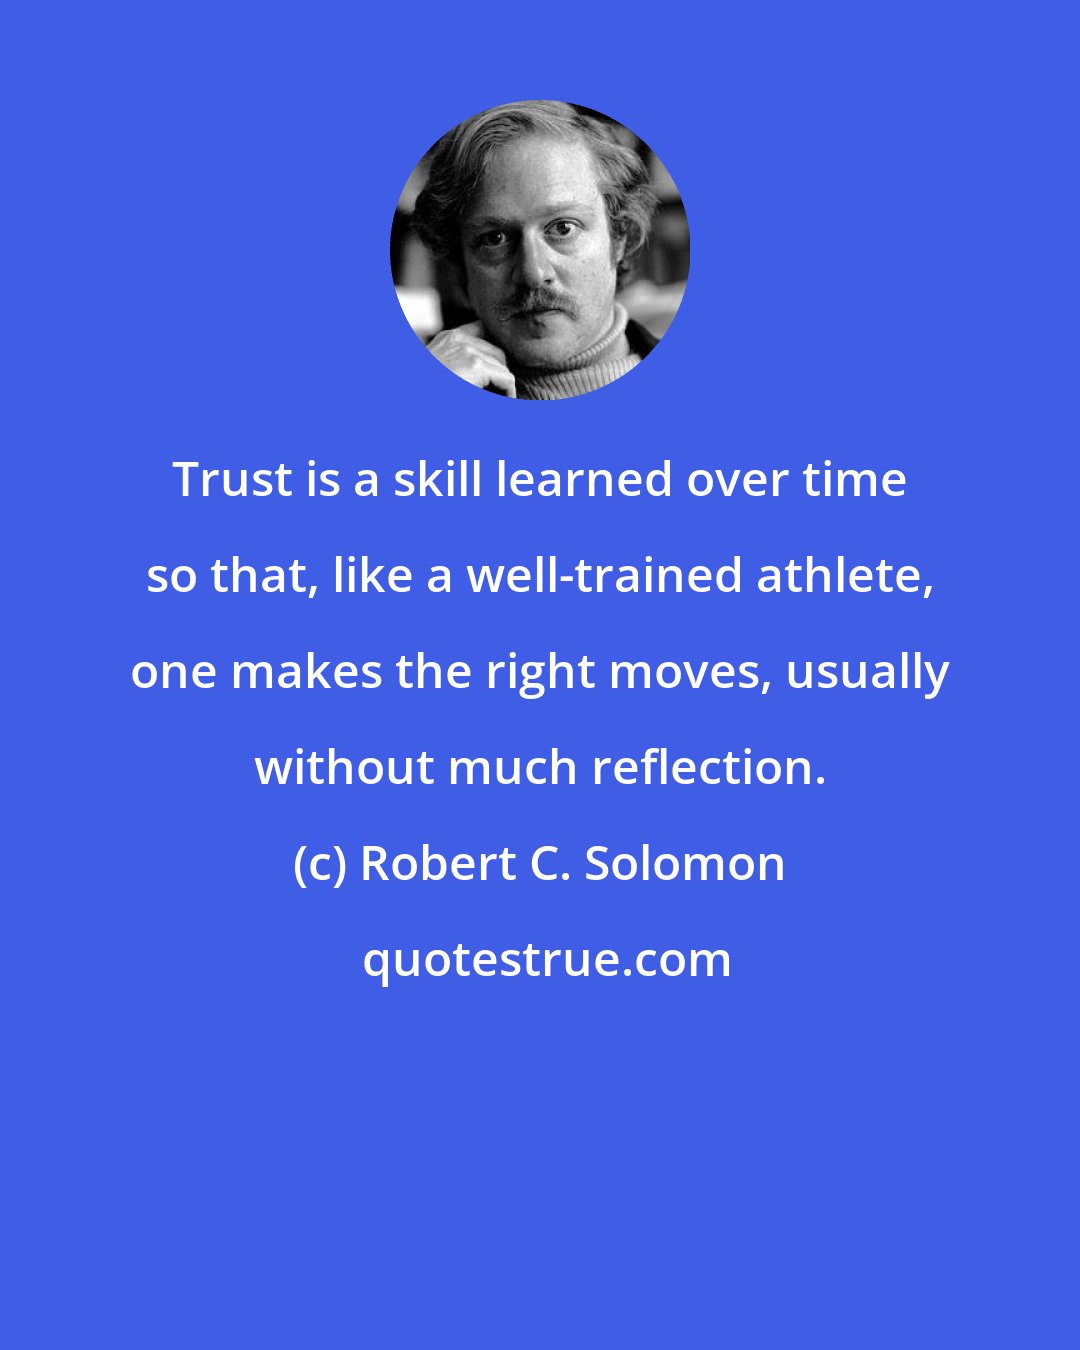 Robert C. Solomon: Trust is a skill learned over time so that, like a well-trained athlete, one makes the right moves, usually without much reflection.